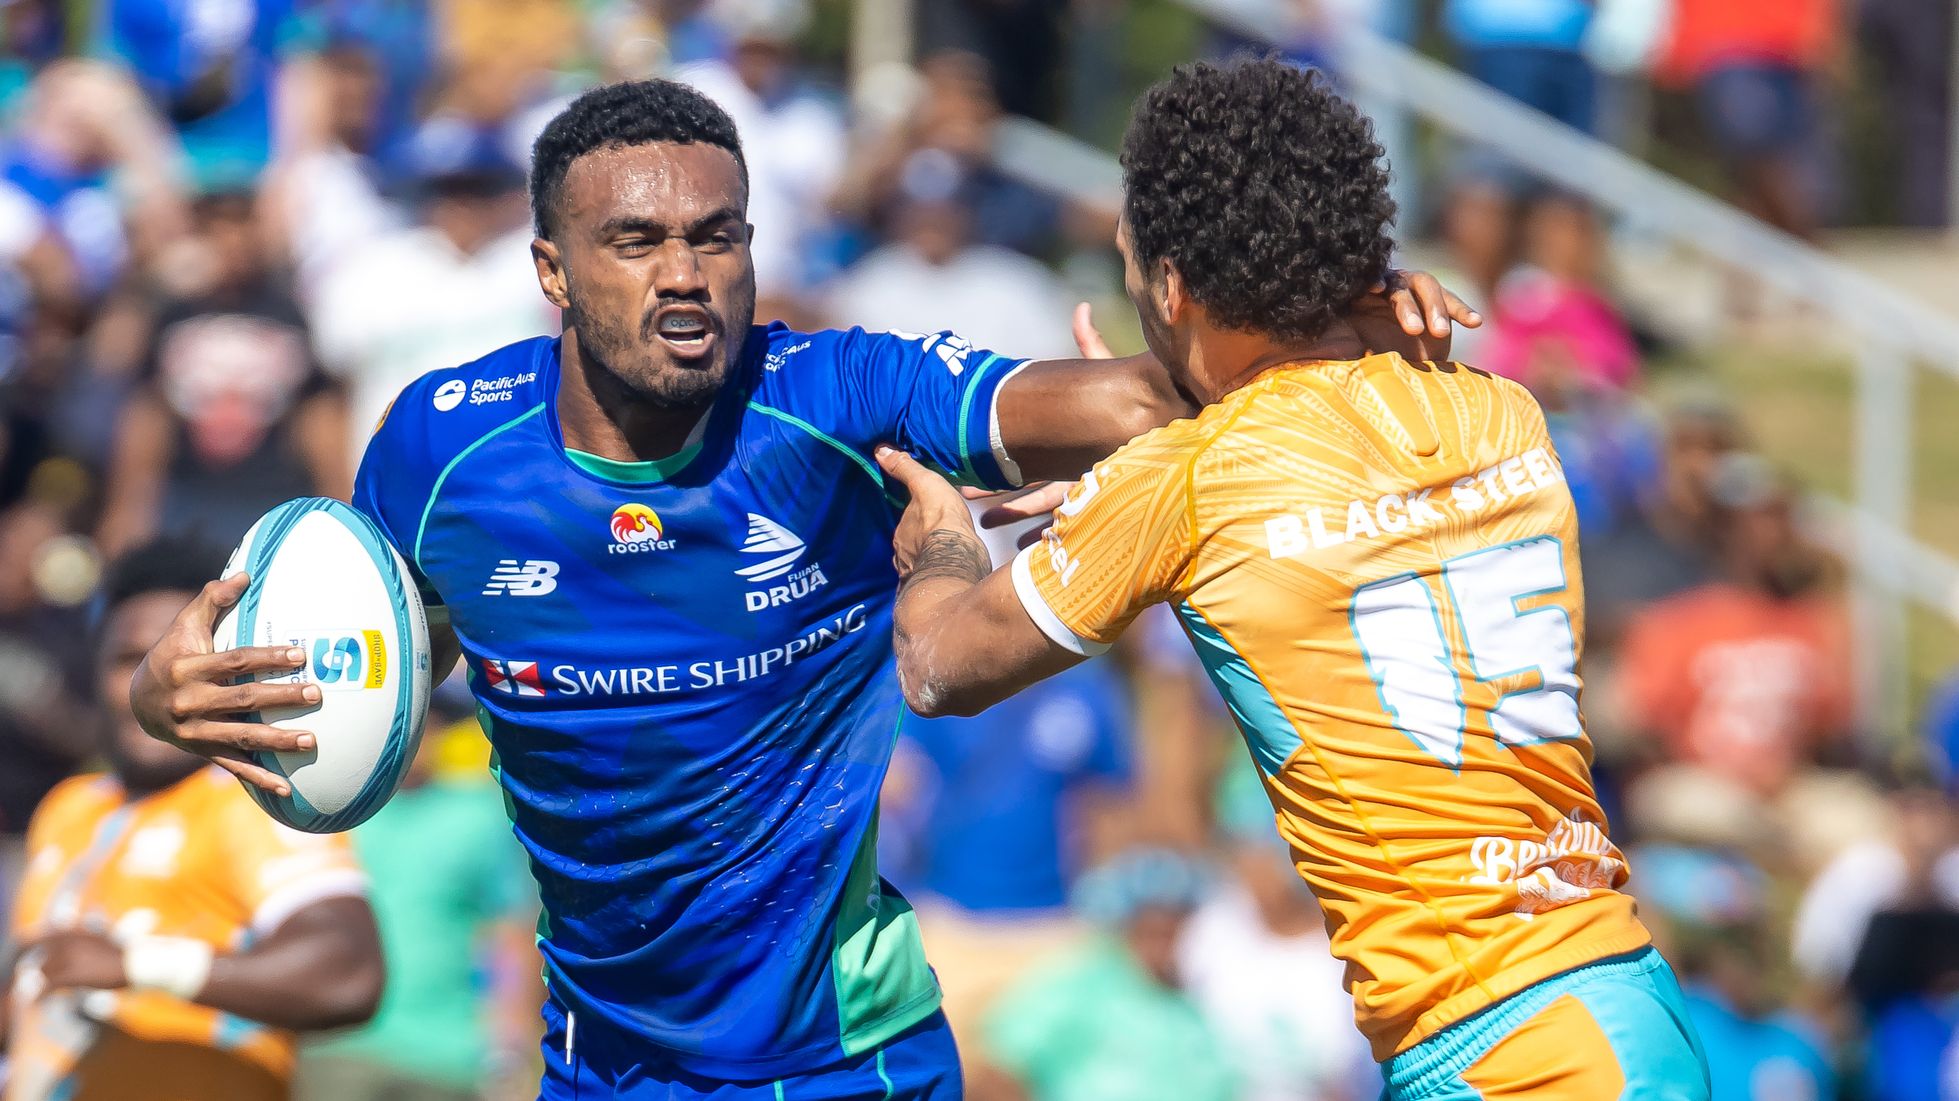 Isefo Masi runs with the ball during the round 14 Super Rugby Pacific match between Fijian Drua and Moana Pasifika at Churchill Park.